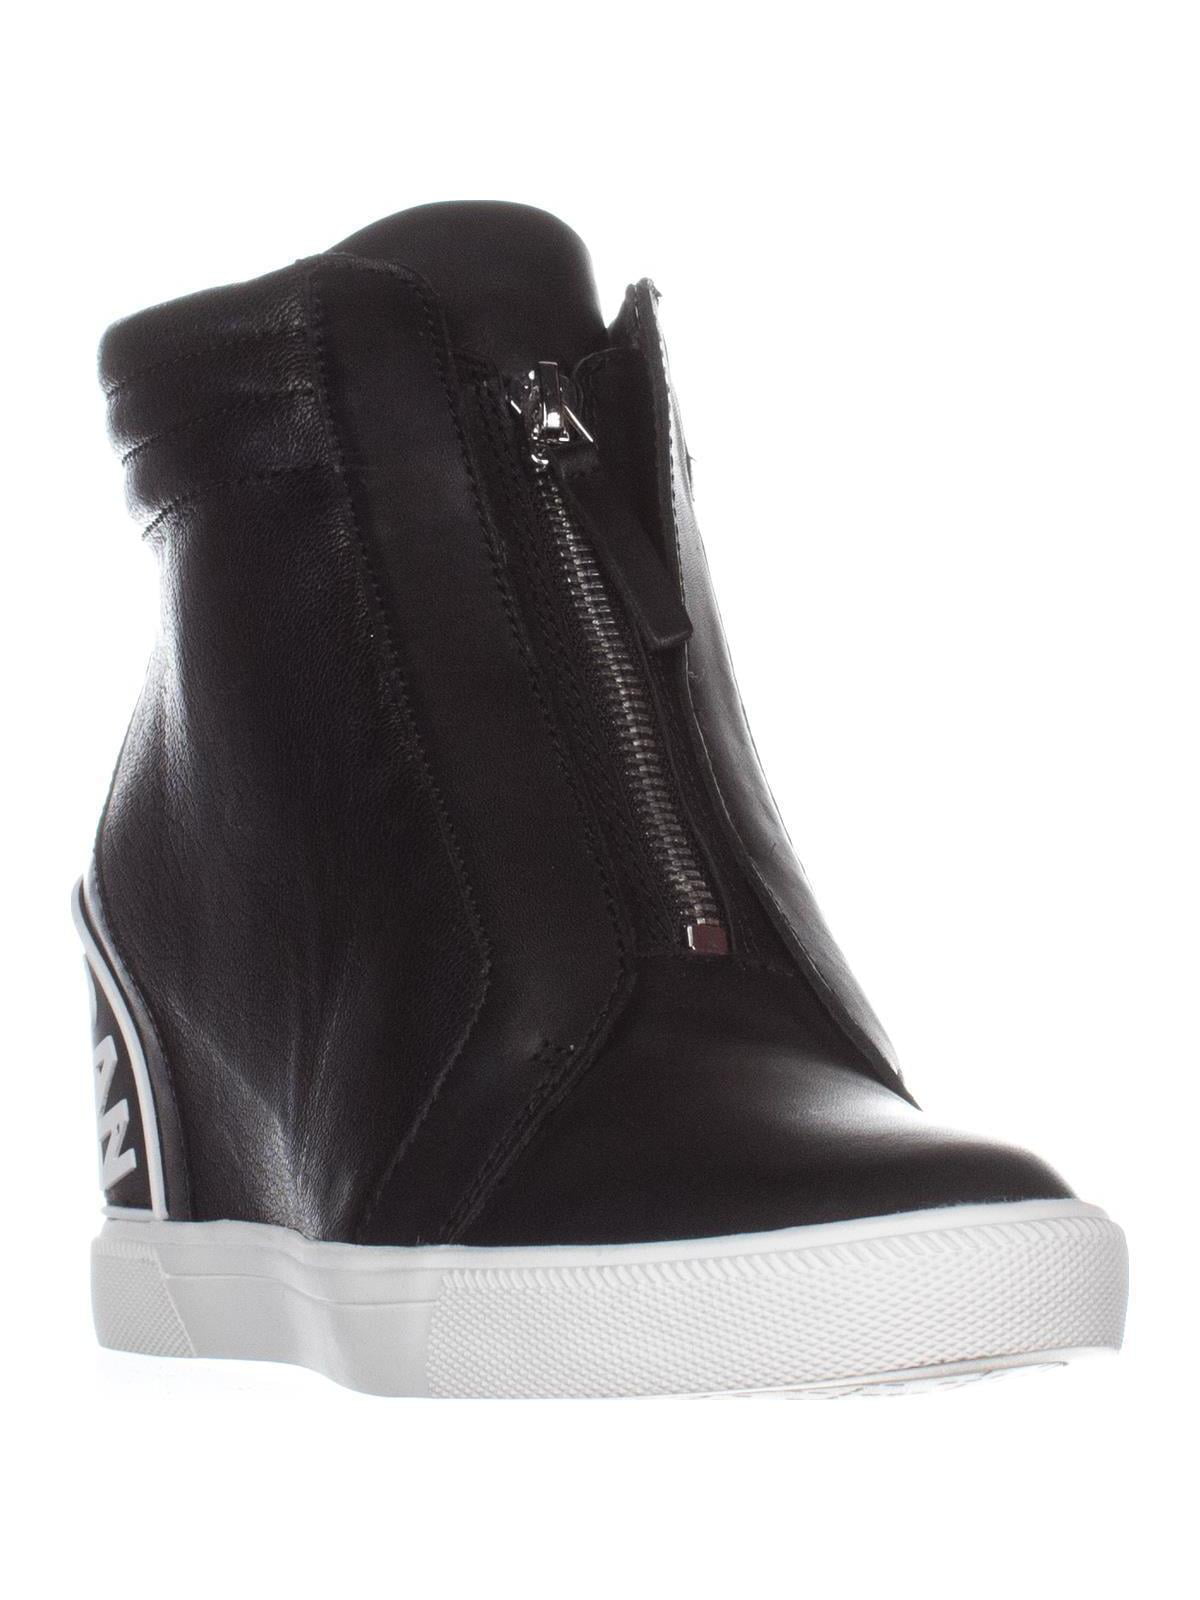 dkny connie wedge sneaker